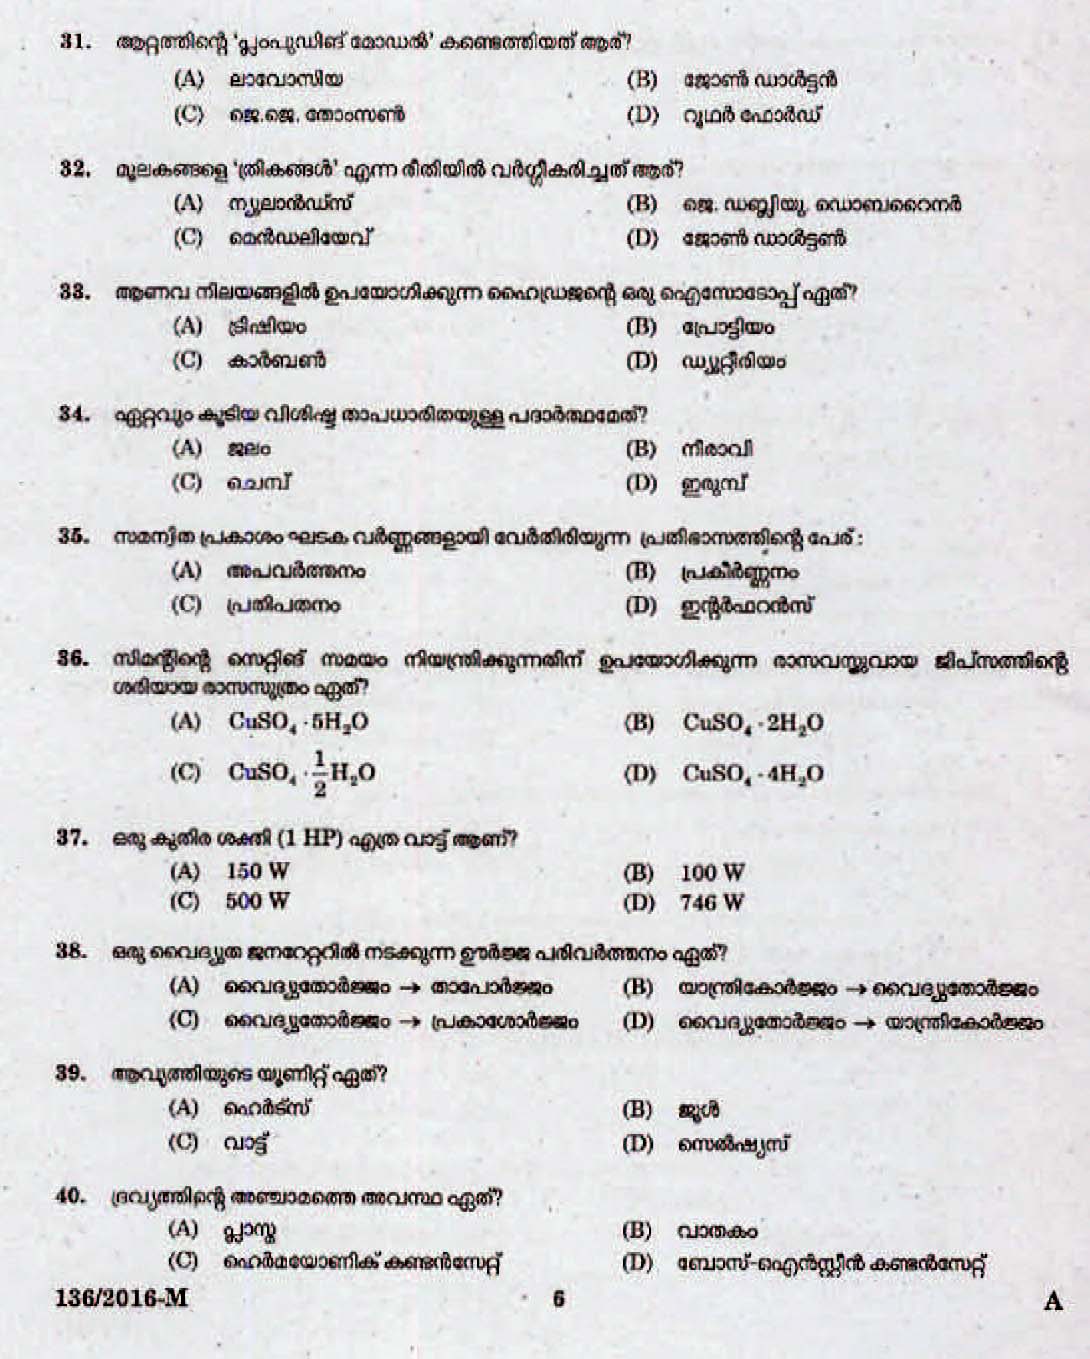 LD Clerk Question Paper Malayalam 2016 Paper Code 1362016 M 4